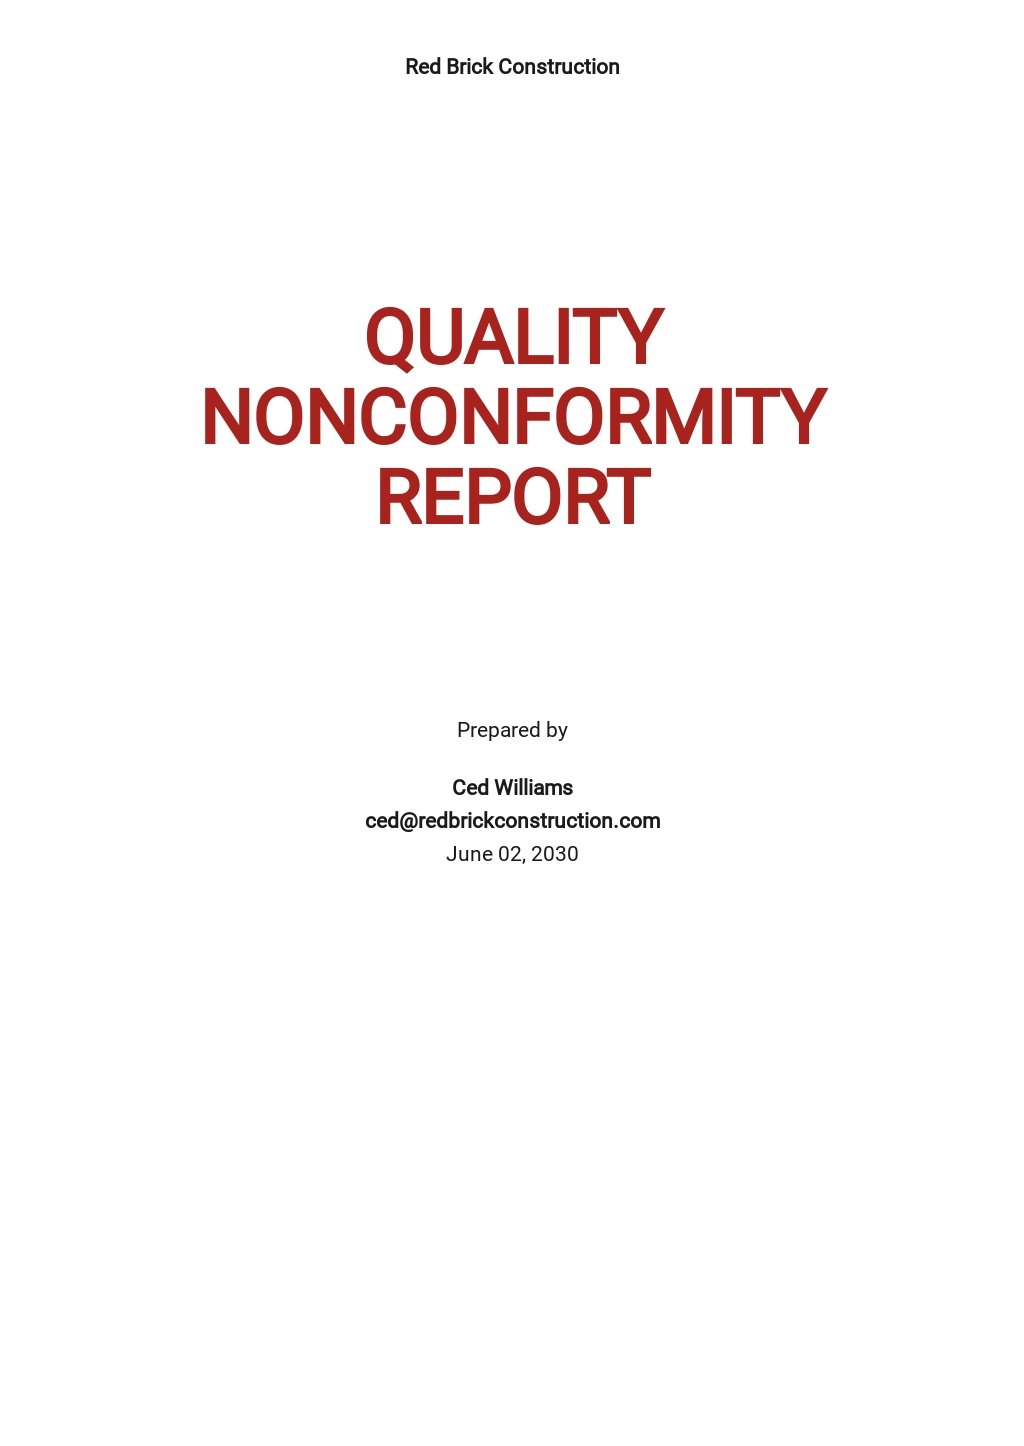 Free Quality Nonconformity Report Template.jpe